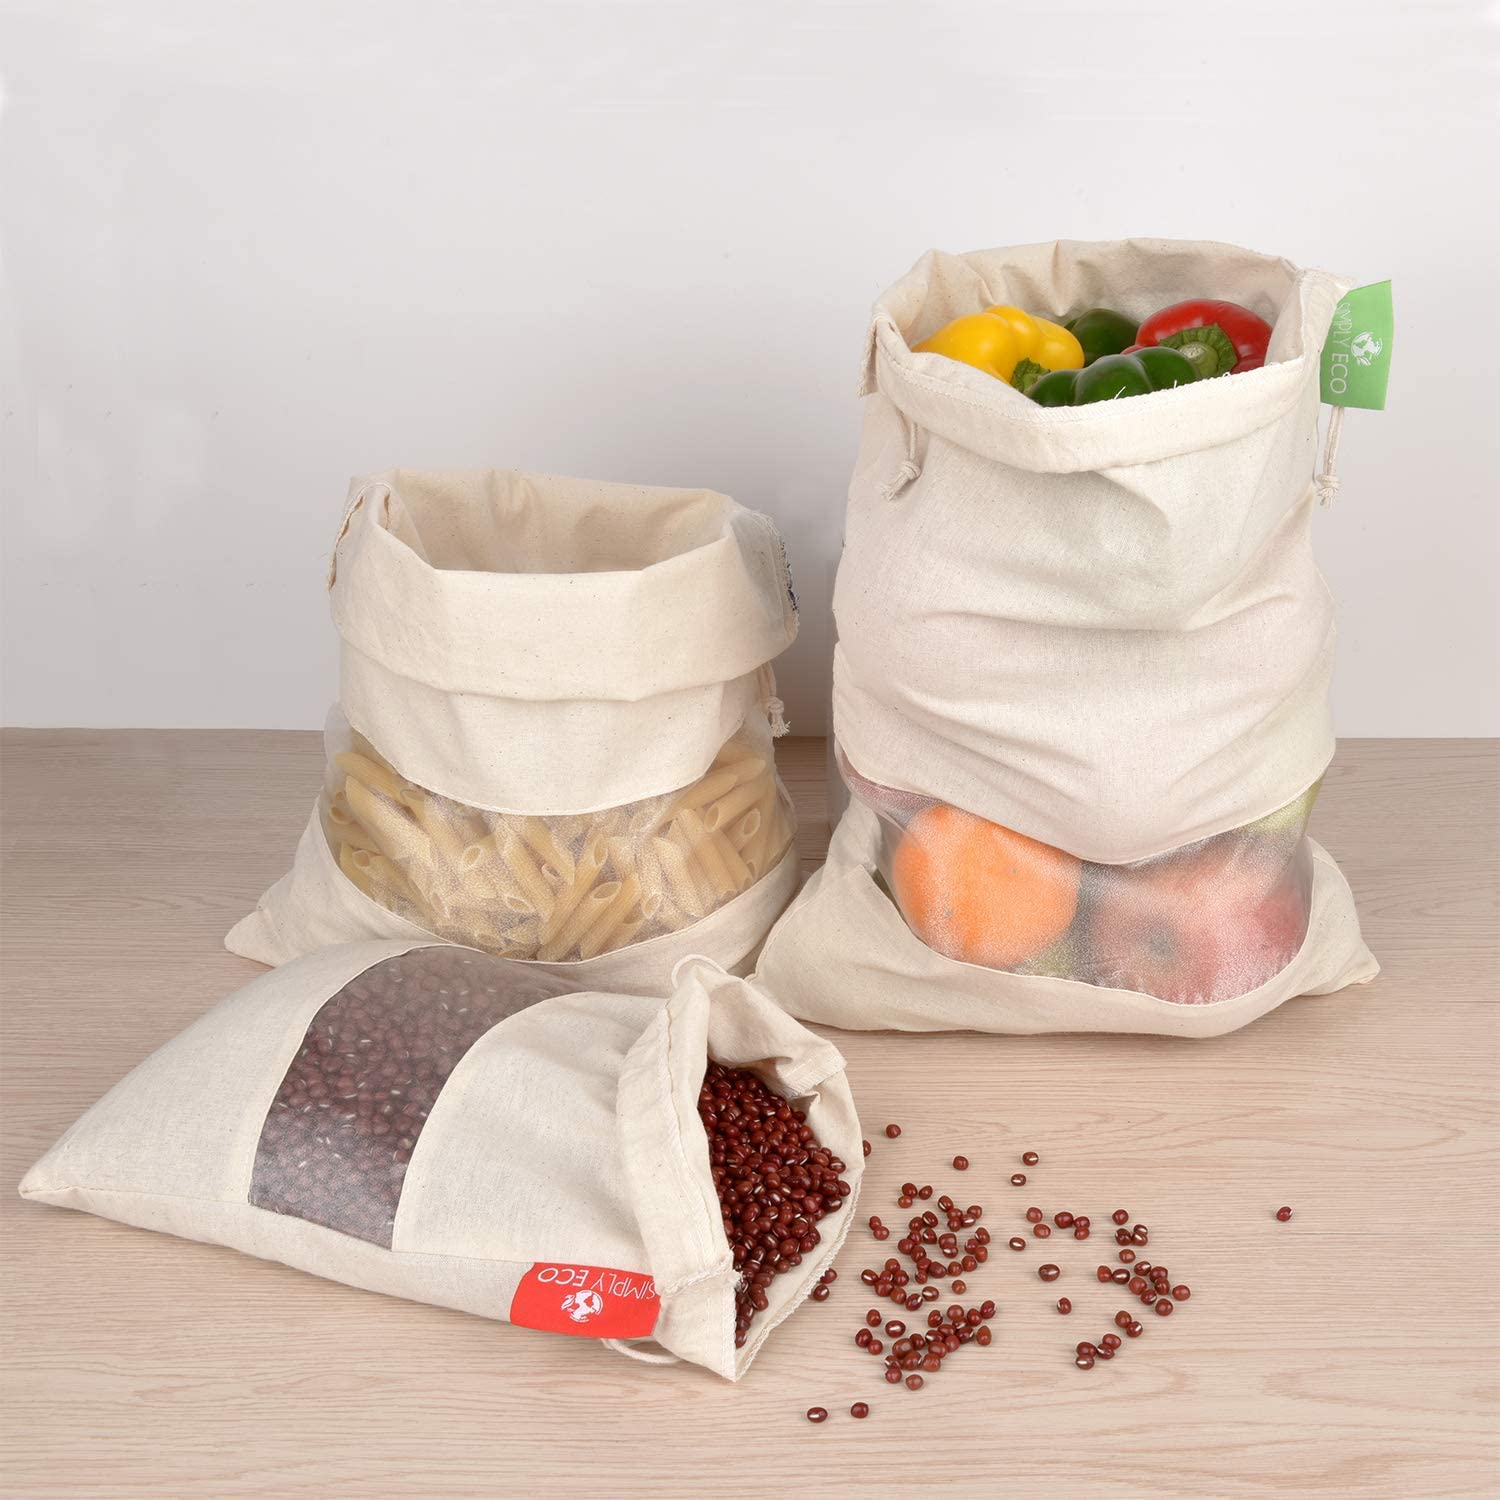 These reusable cotton produce bags include muslin bags with a window so you can see what's inside.